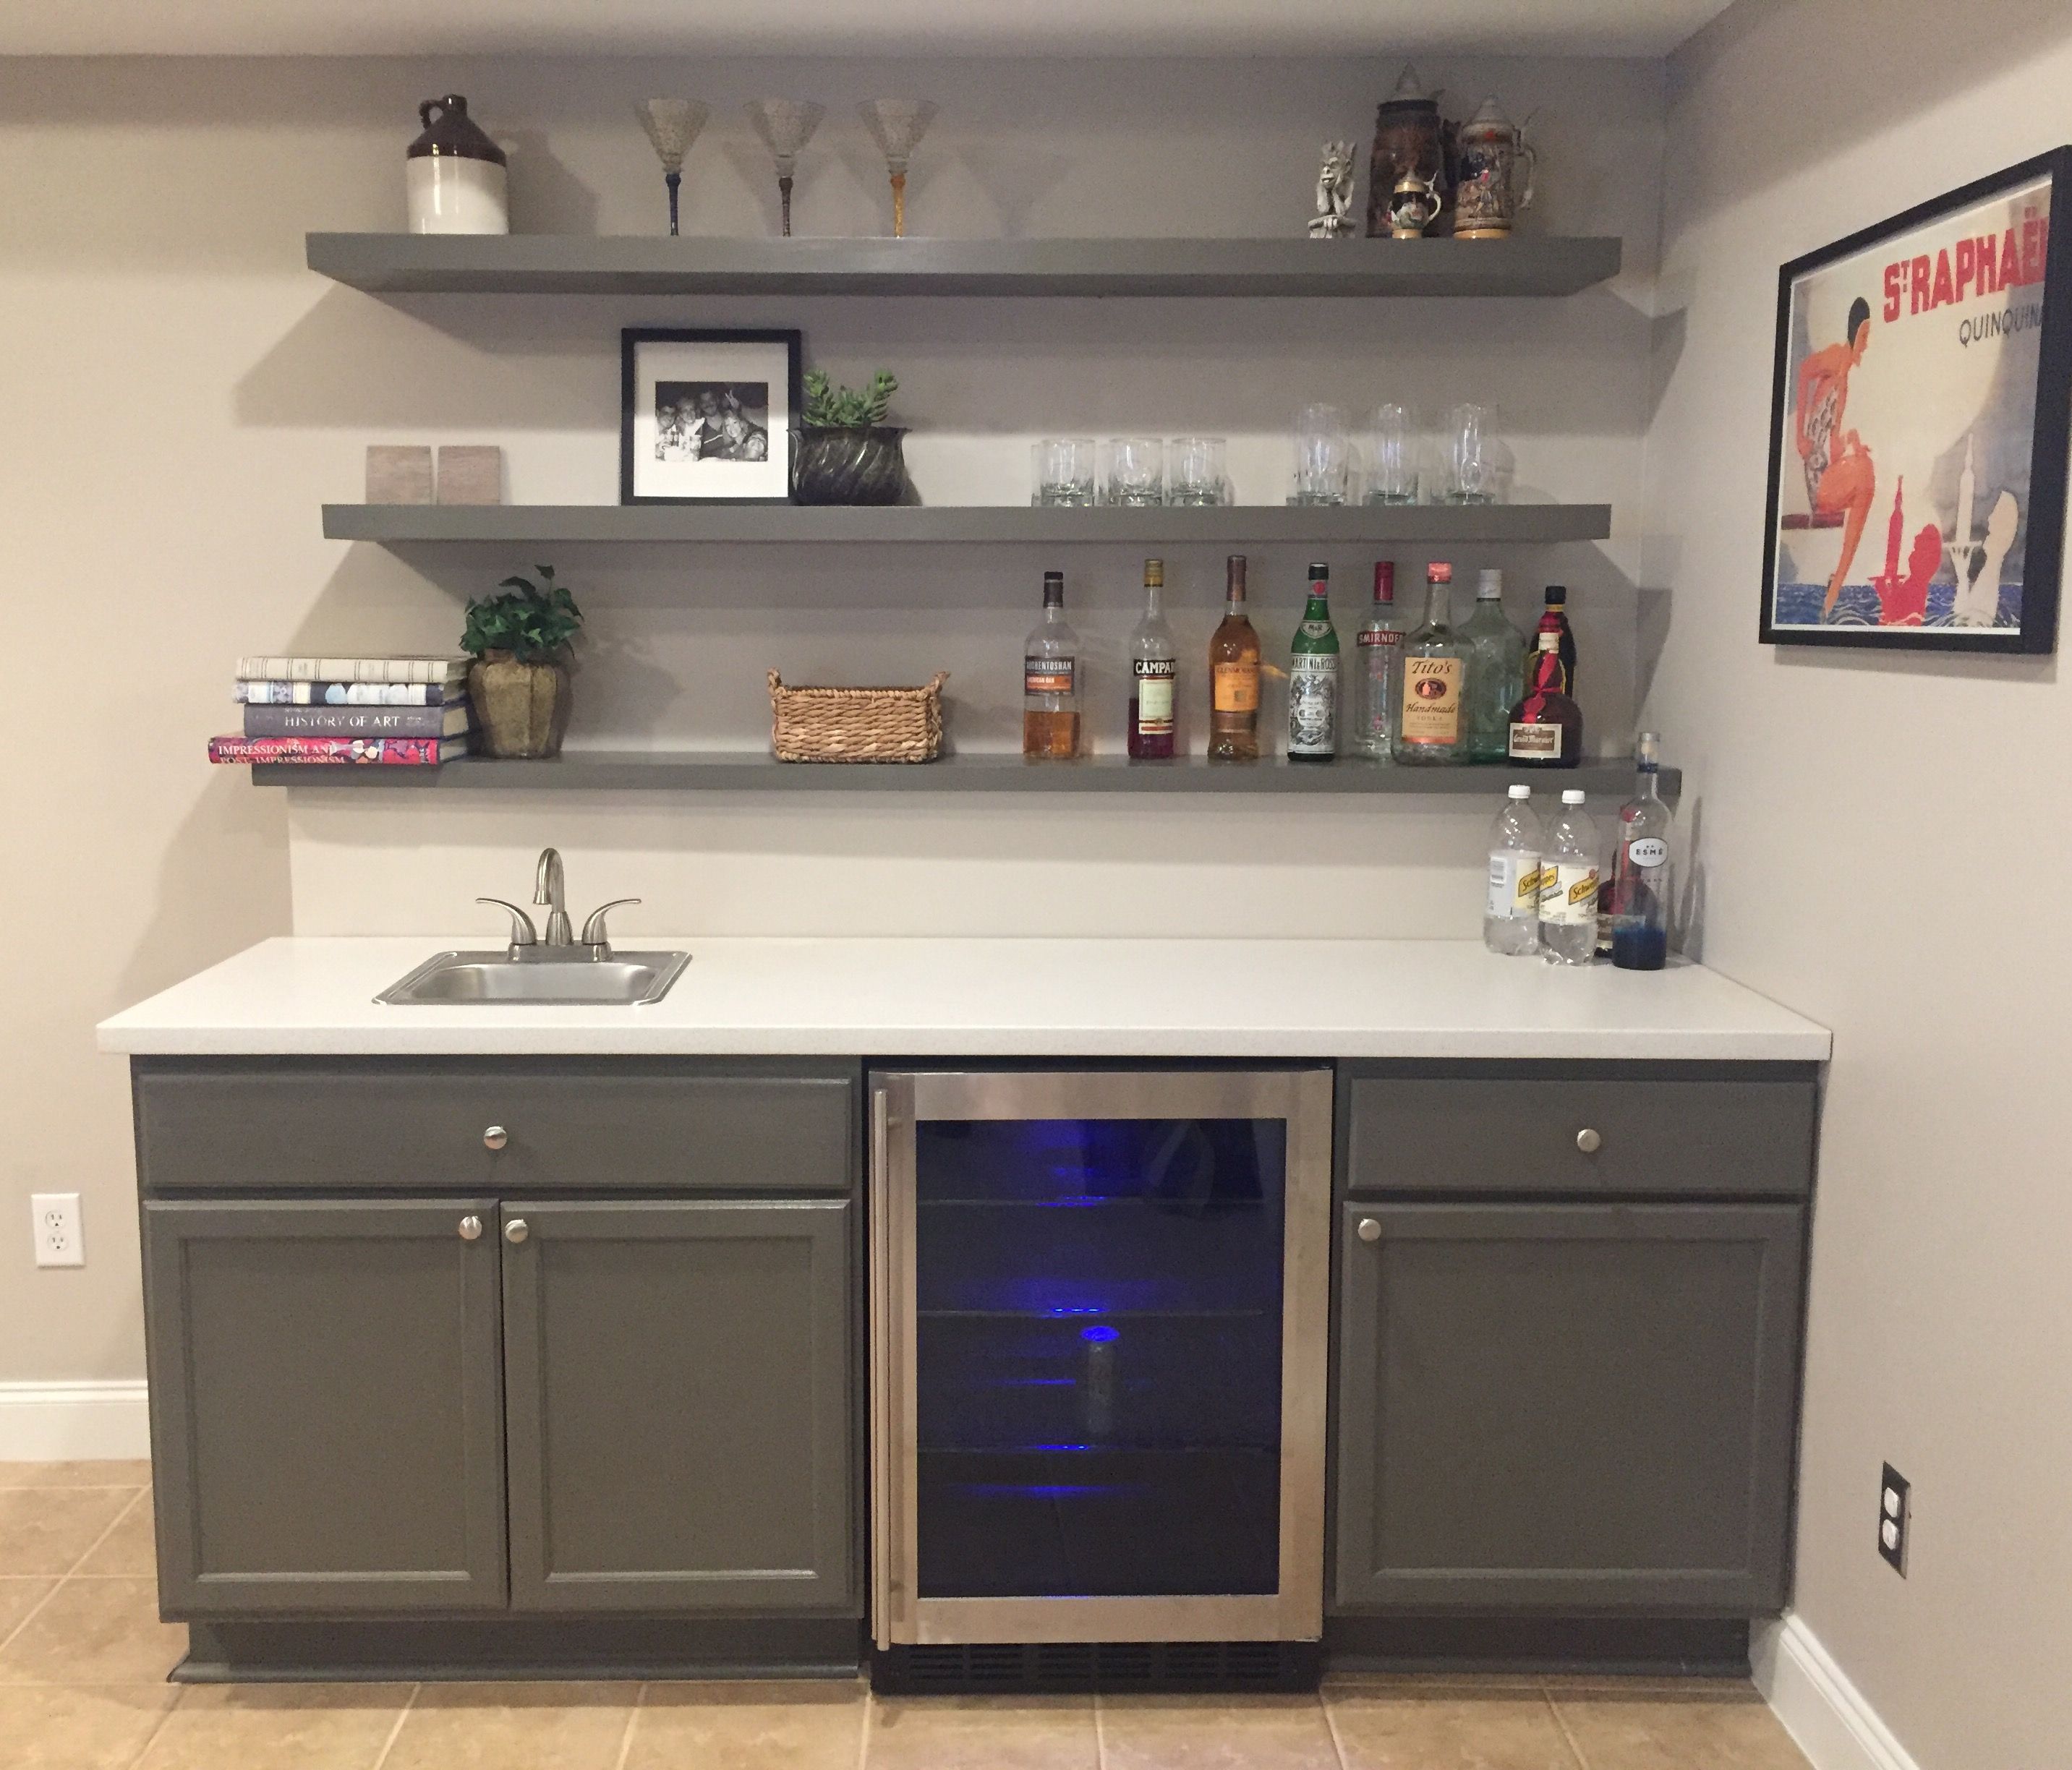 Kitchen design ideas: a bar area with IKEA cabinets